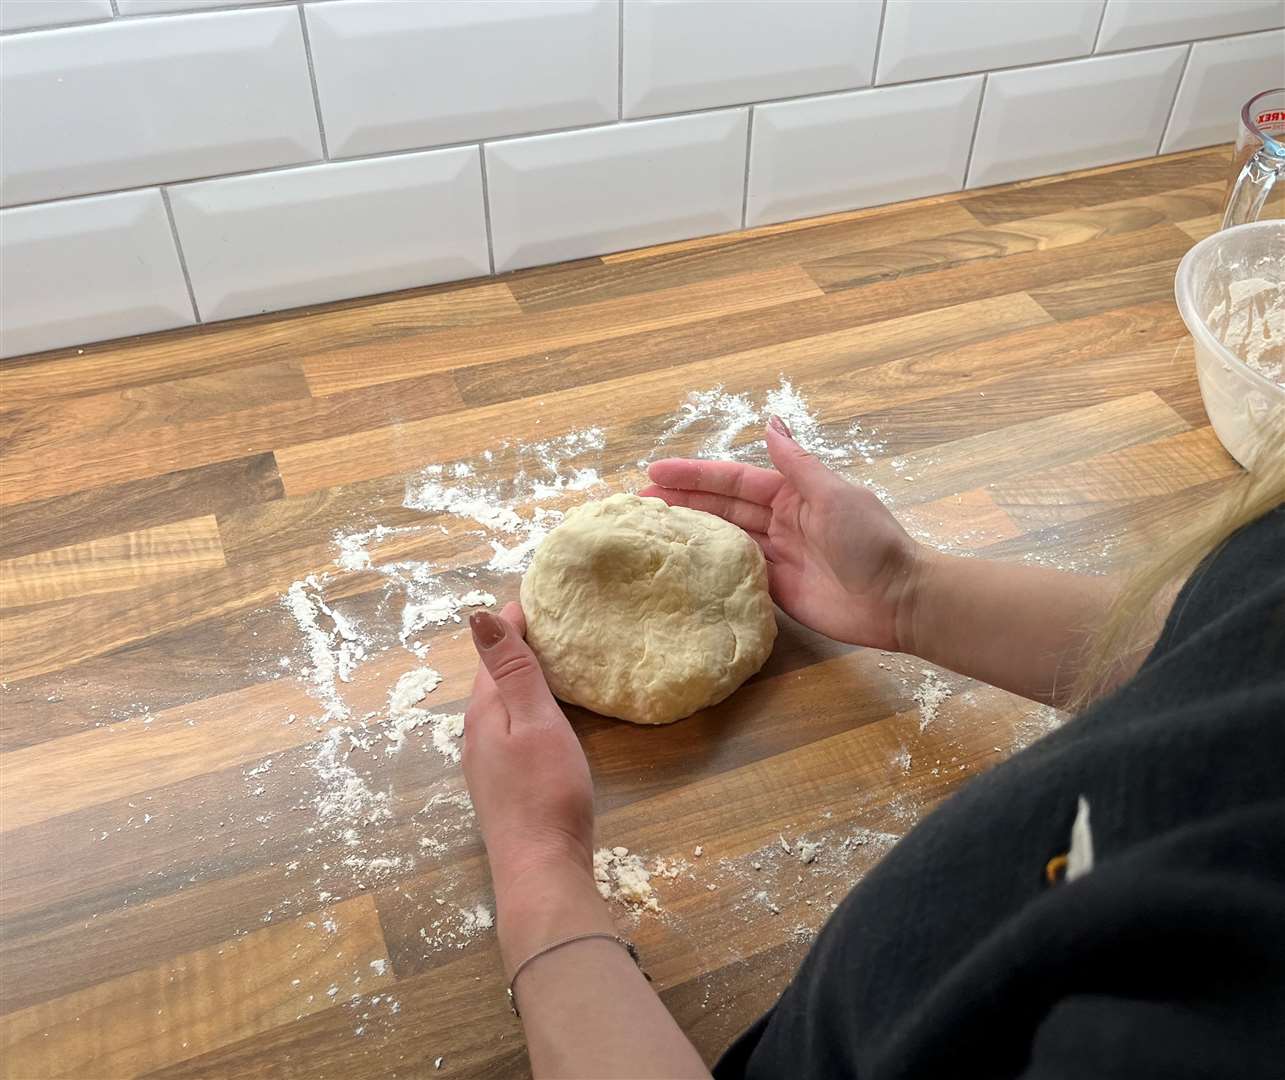 It was fun making the dough for the pizzas, but messy